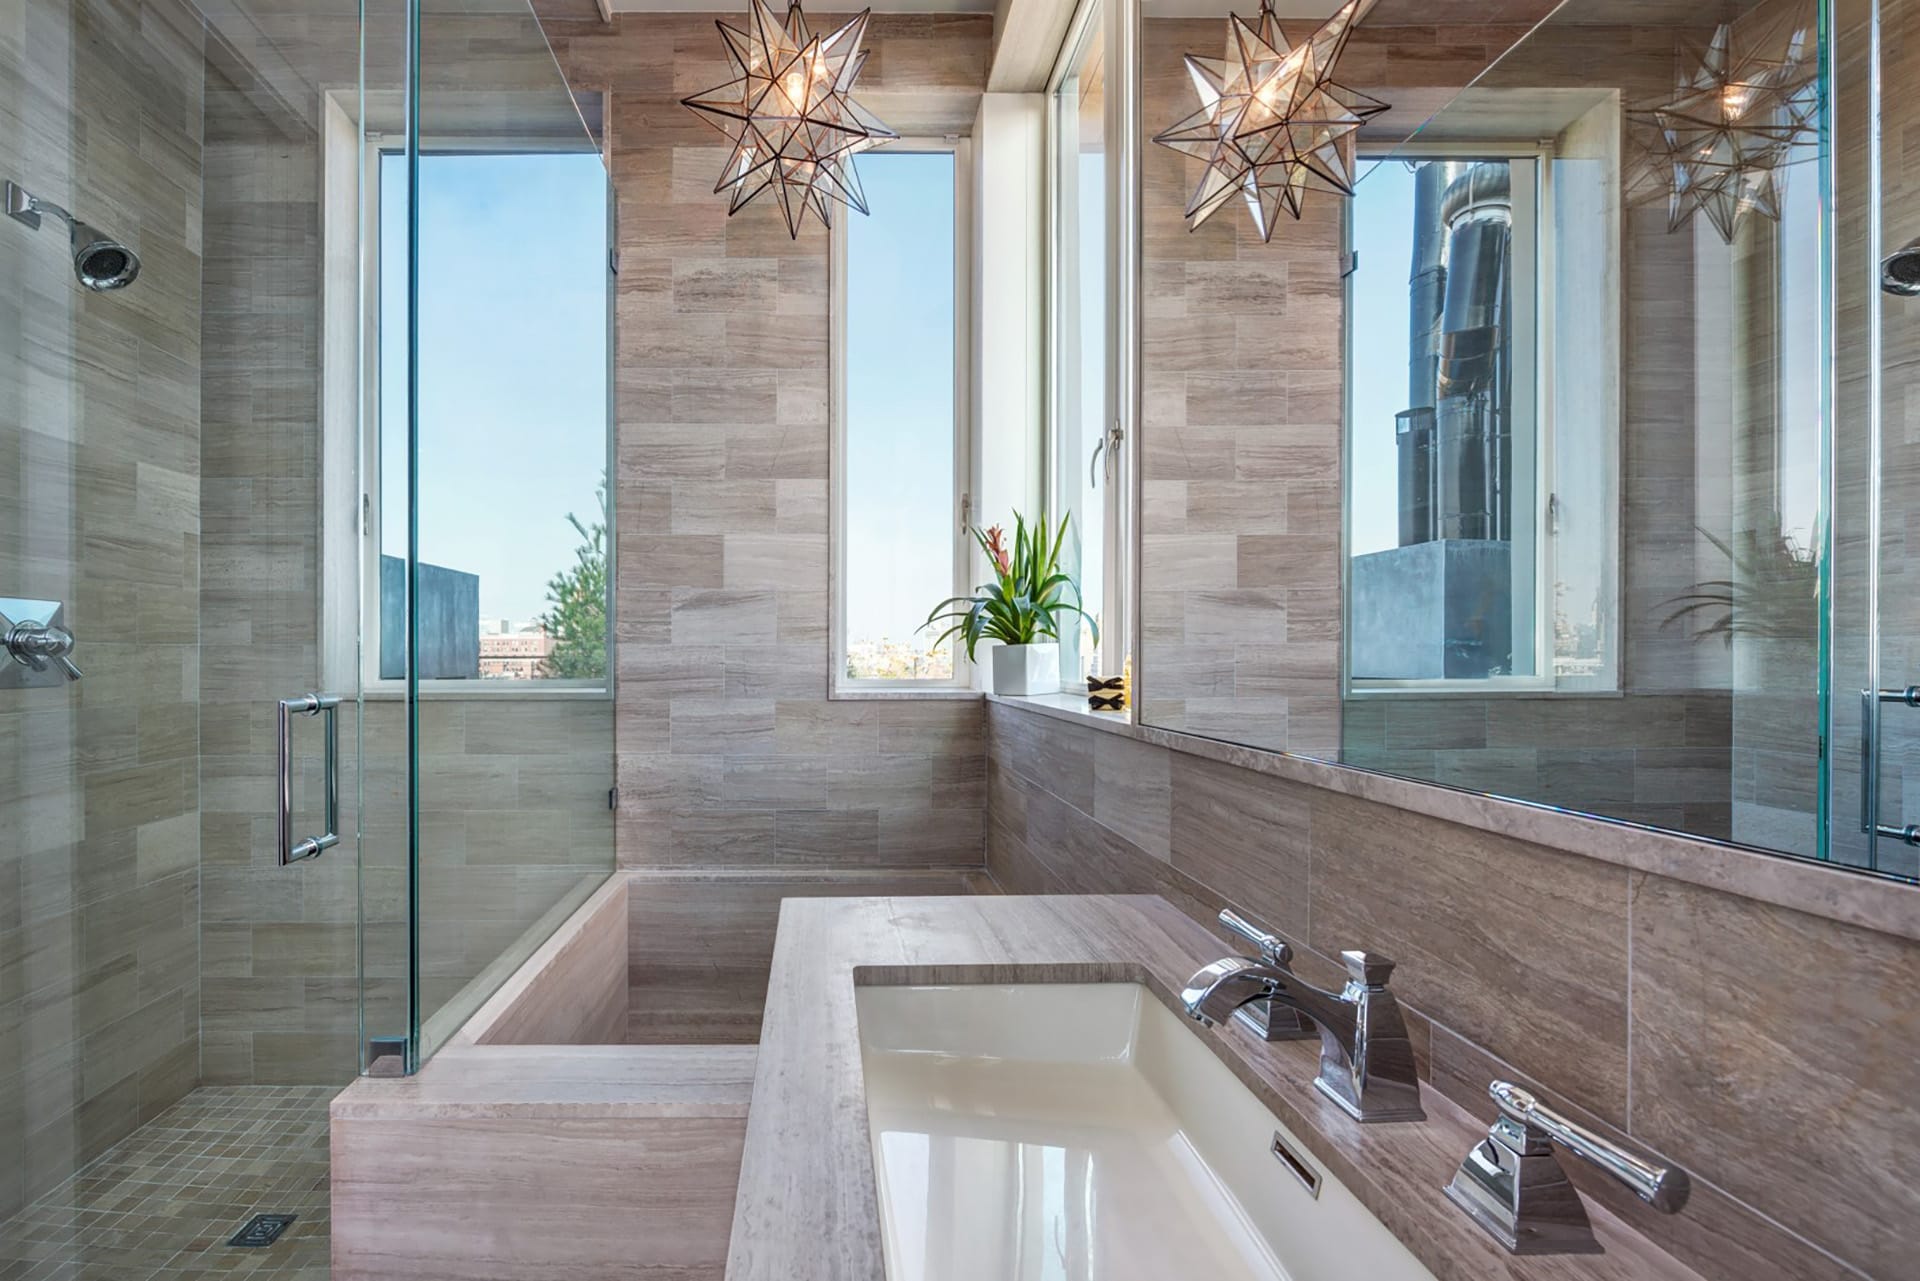 Primary bath with a geometric light fixture and stone covering the walls, floors, tub, and vanity.